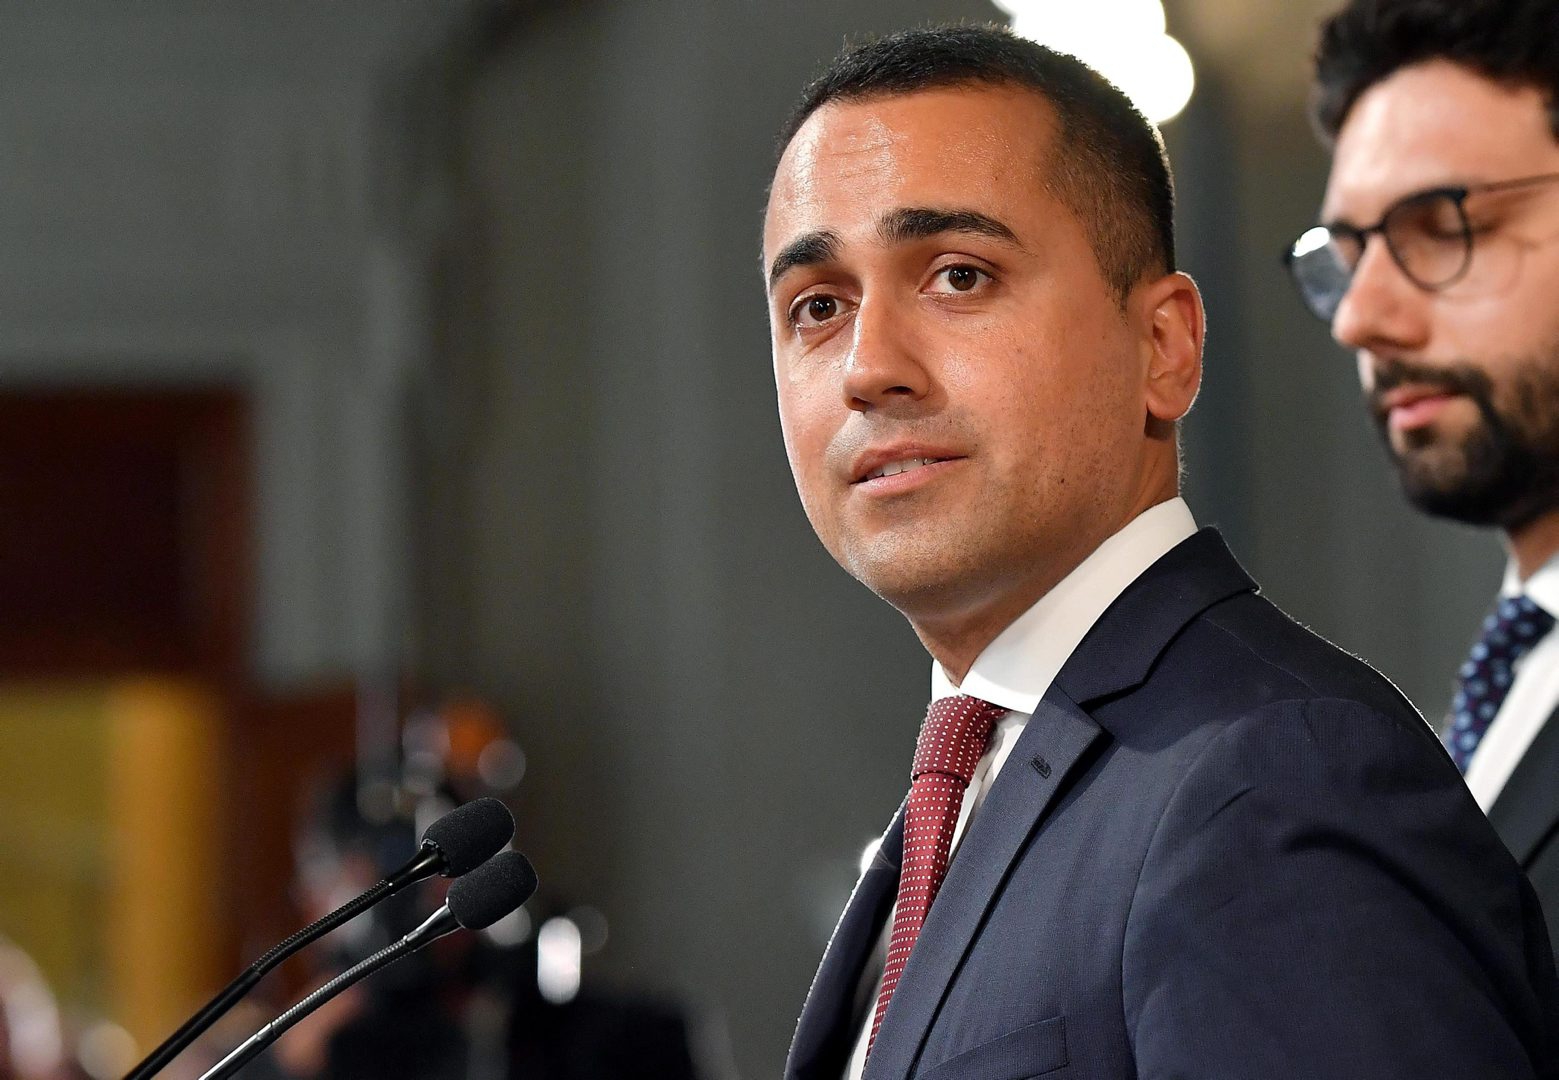 epa07786088 Movimento 5 Stelle leader Luigi Di Maio addresses the media after a meeting with Italian President Sergio Mattarella at the Quirinale Palace for the first round of formal political consultations following the resignation of Prime Minister Giuseppe Conte in Rome, Italy, 22 August 2019.  EPA/ETTORE FERRARI ITALY  GOVERNMENT CRISIS